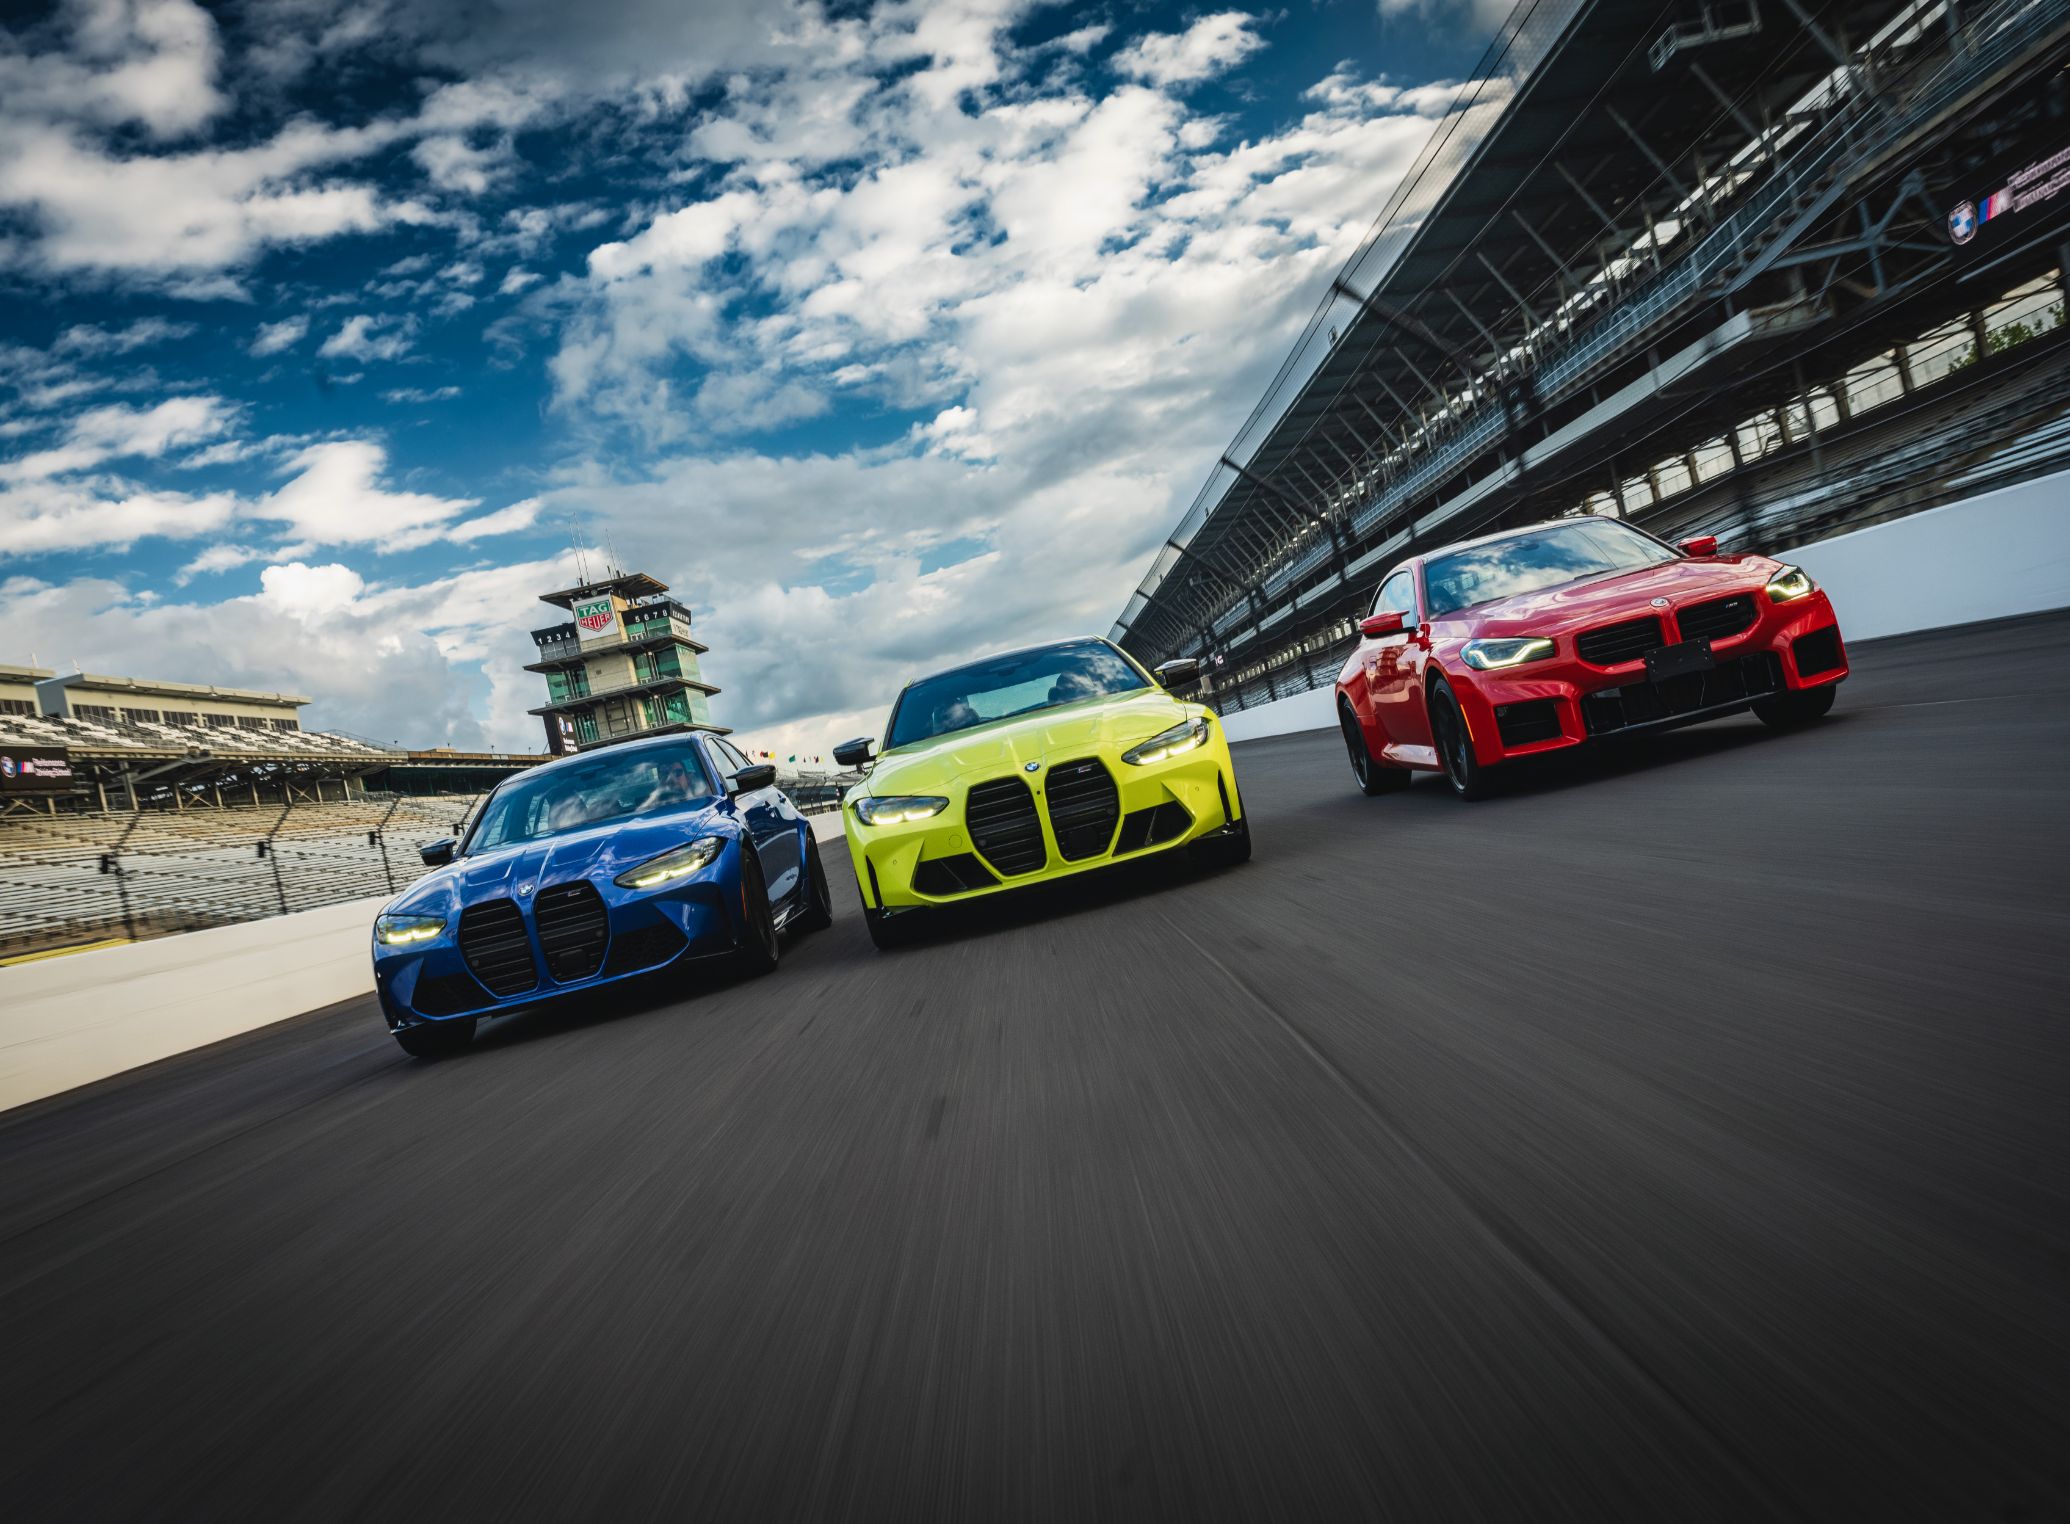 BMW M automobile and M Performance automobile